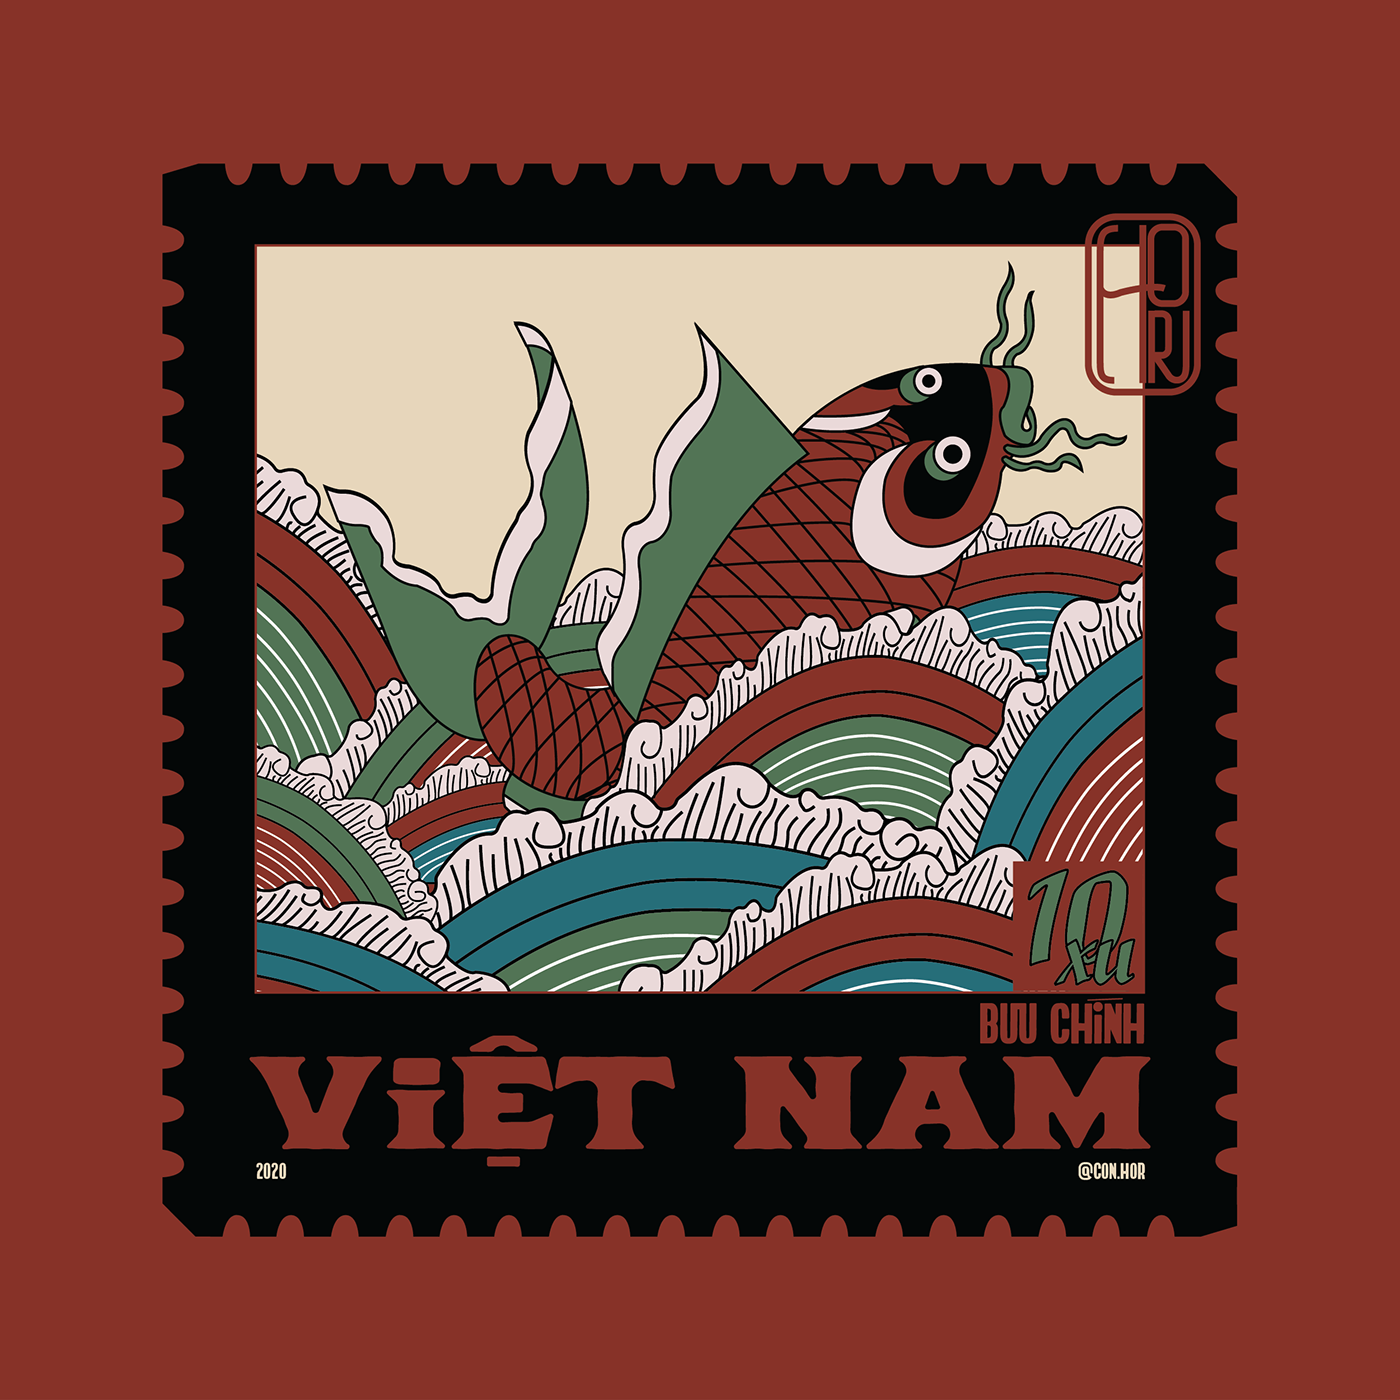 Ancient art asian dong ho graphic history stamp tradition viet nam vietnam